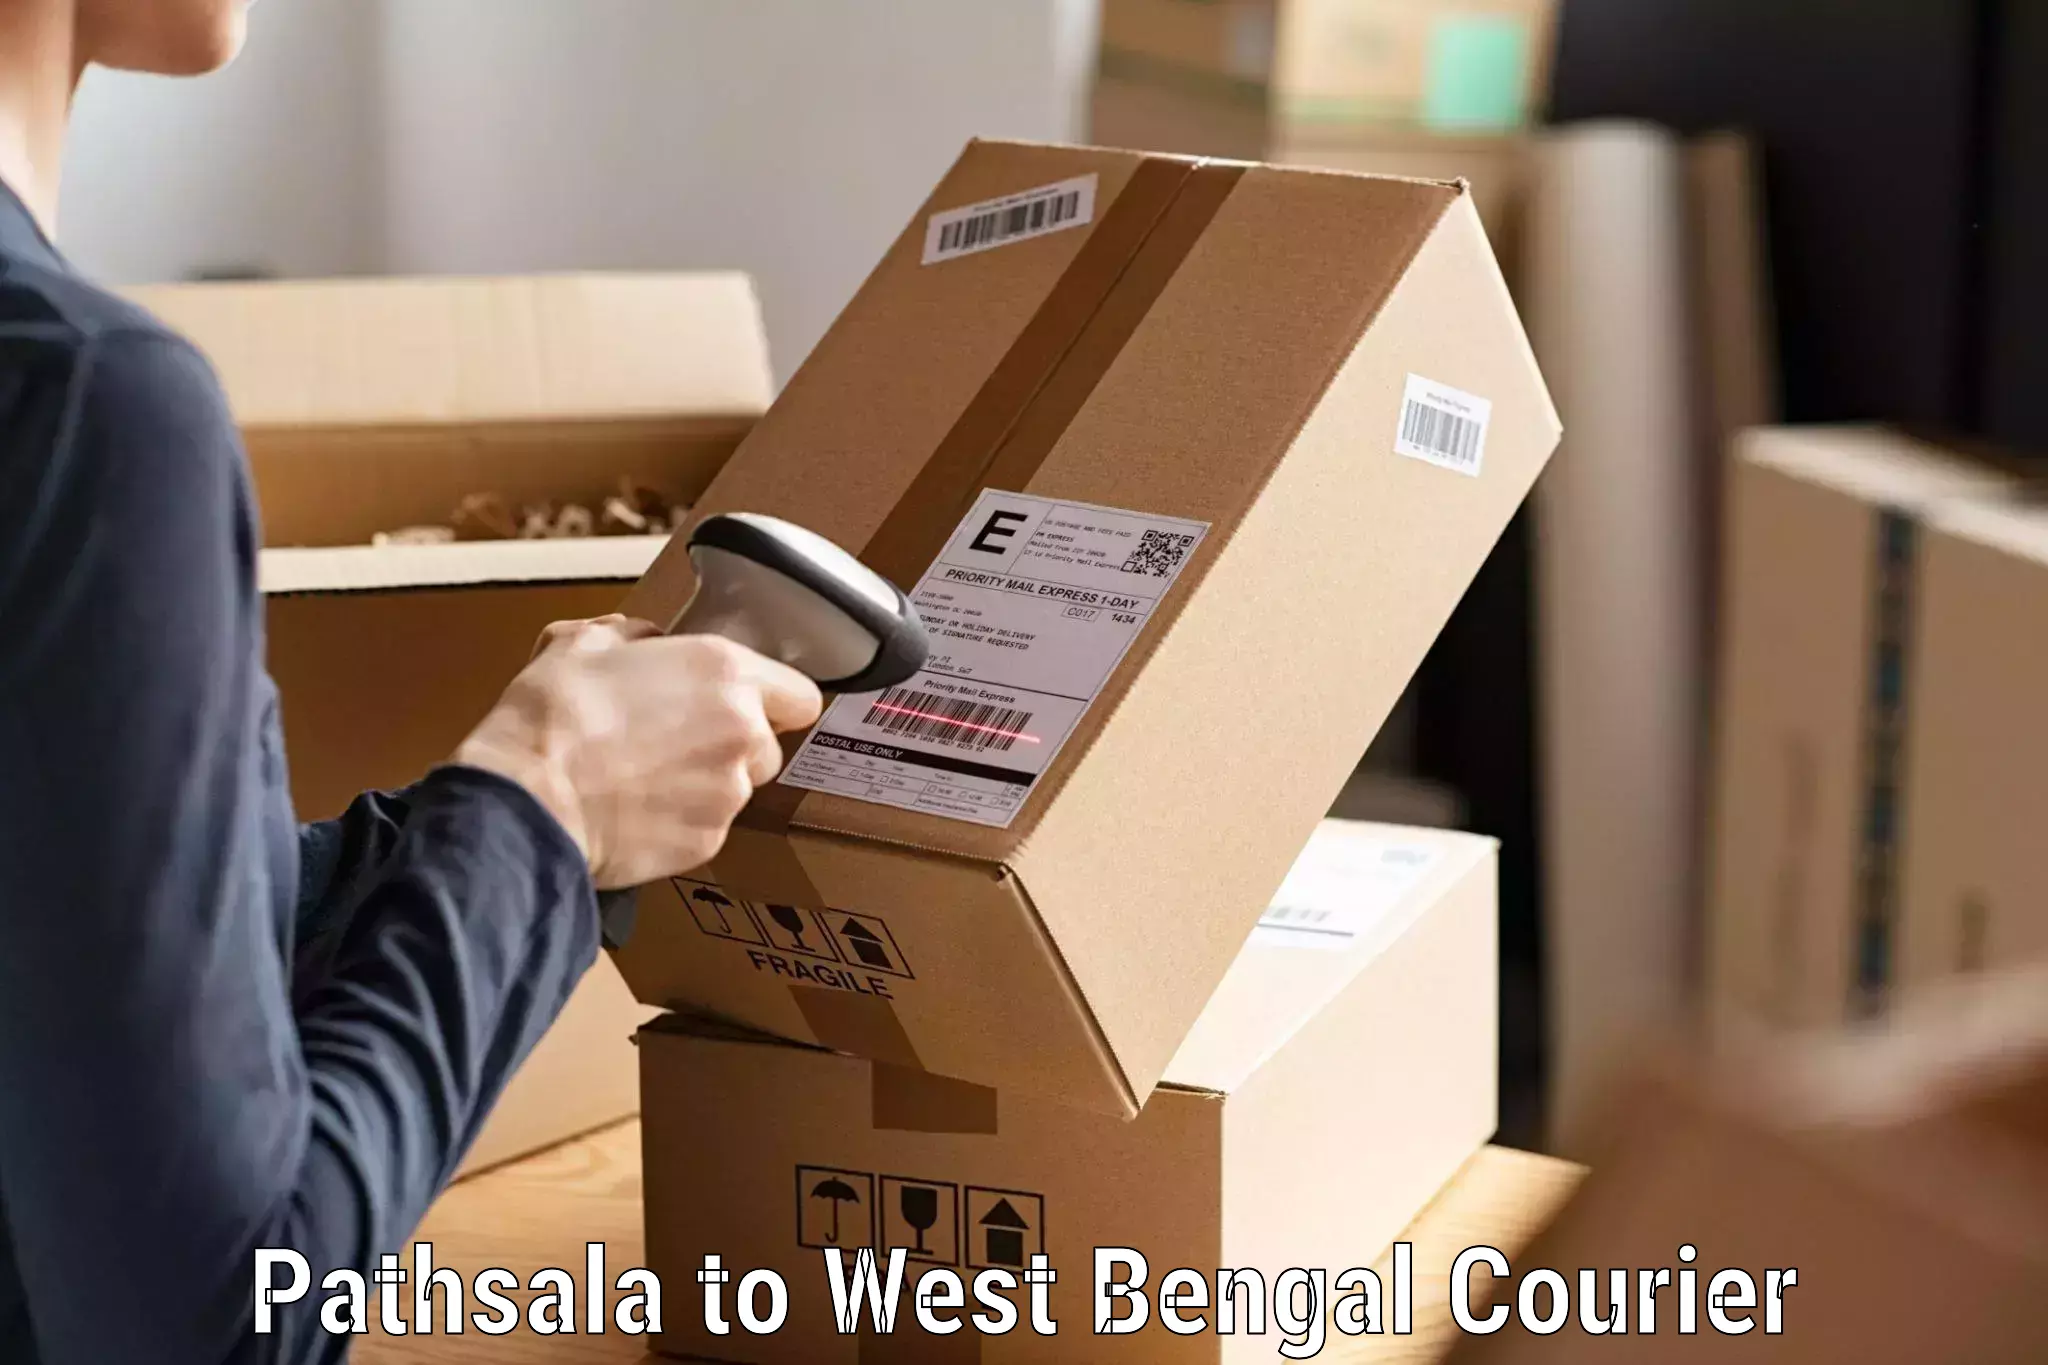 Courier service innovation Pathsala to Hura